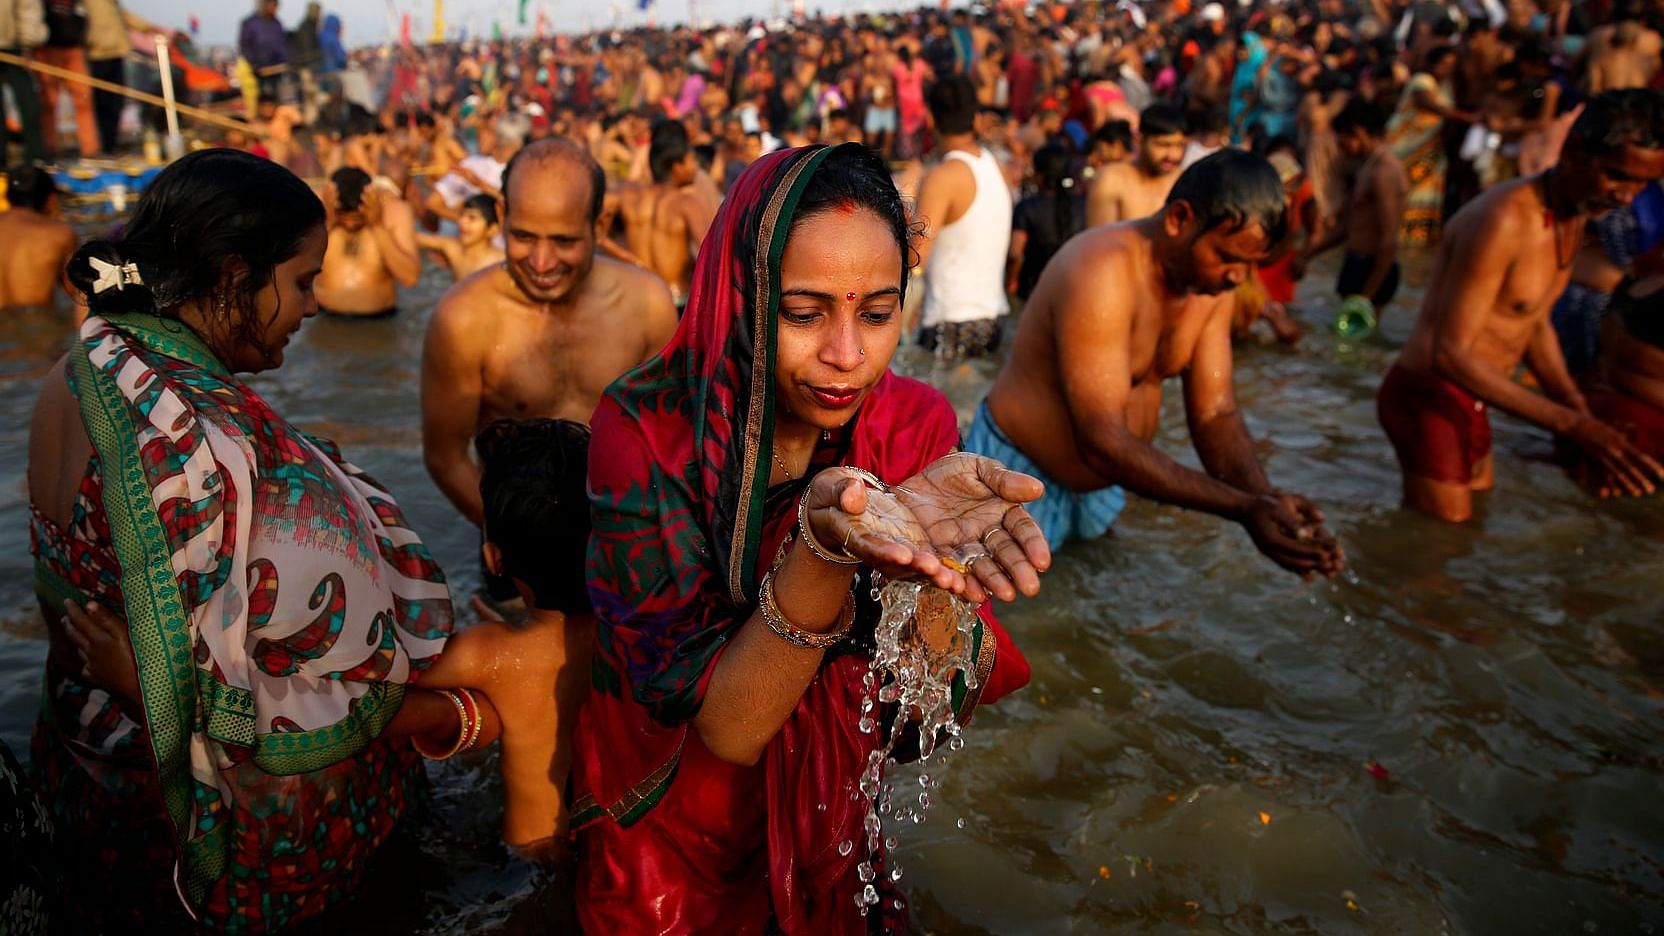  A devotee offers prayers after taking a dip at the Sangam, on ‘Mauni Amavasya’ or new moon day in Prayagraj. Image used for representation.